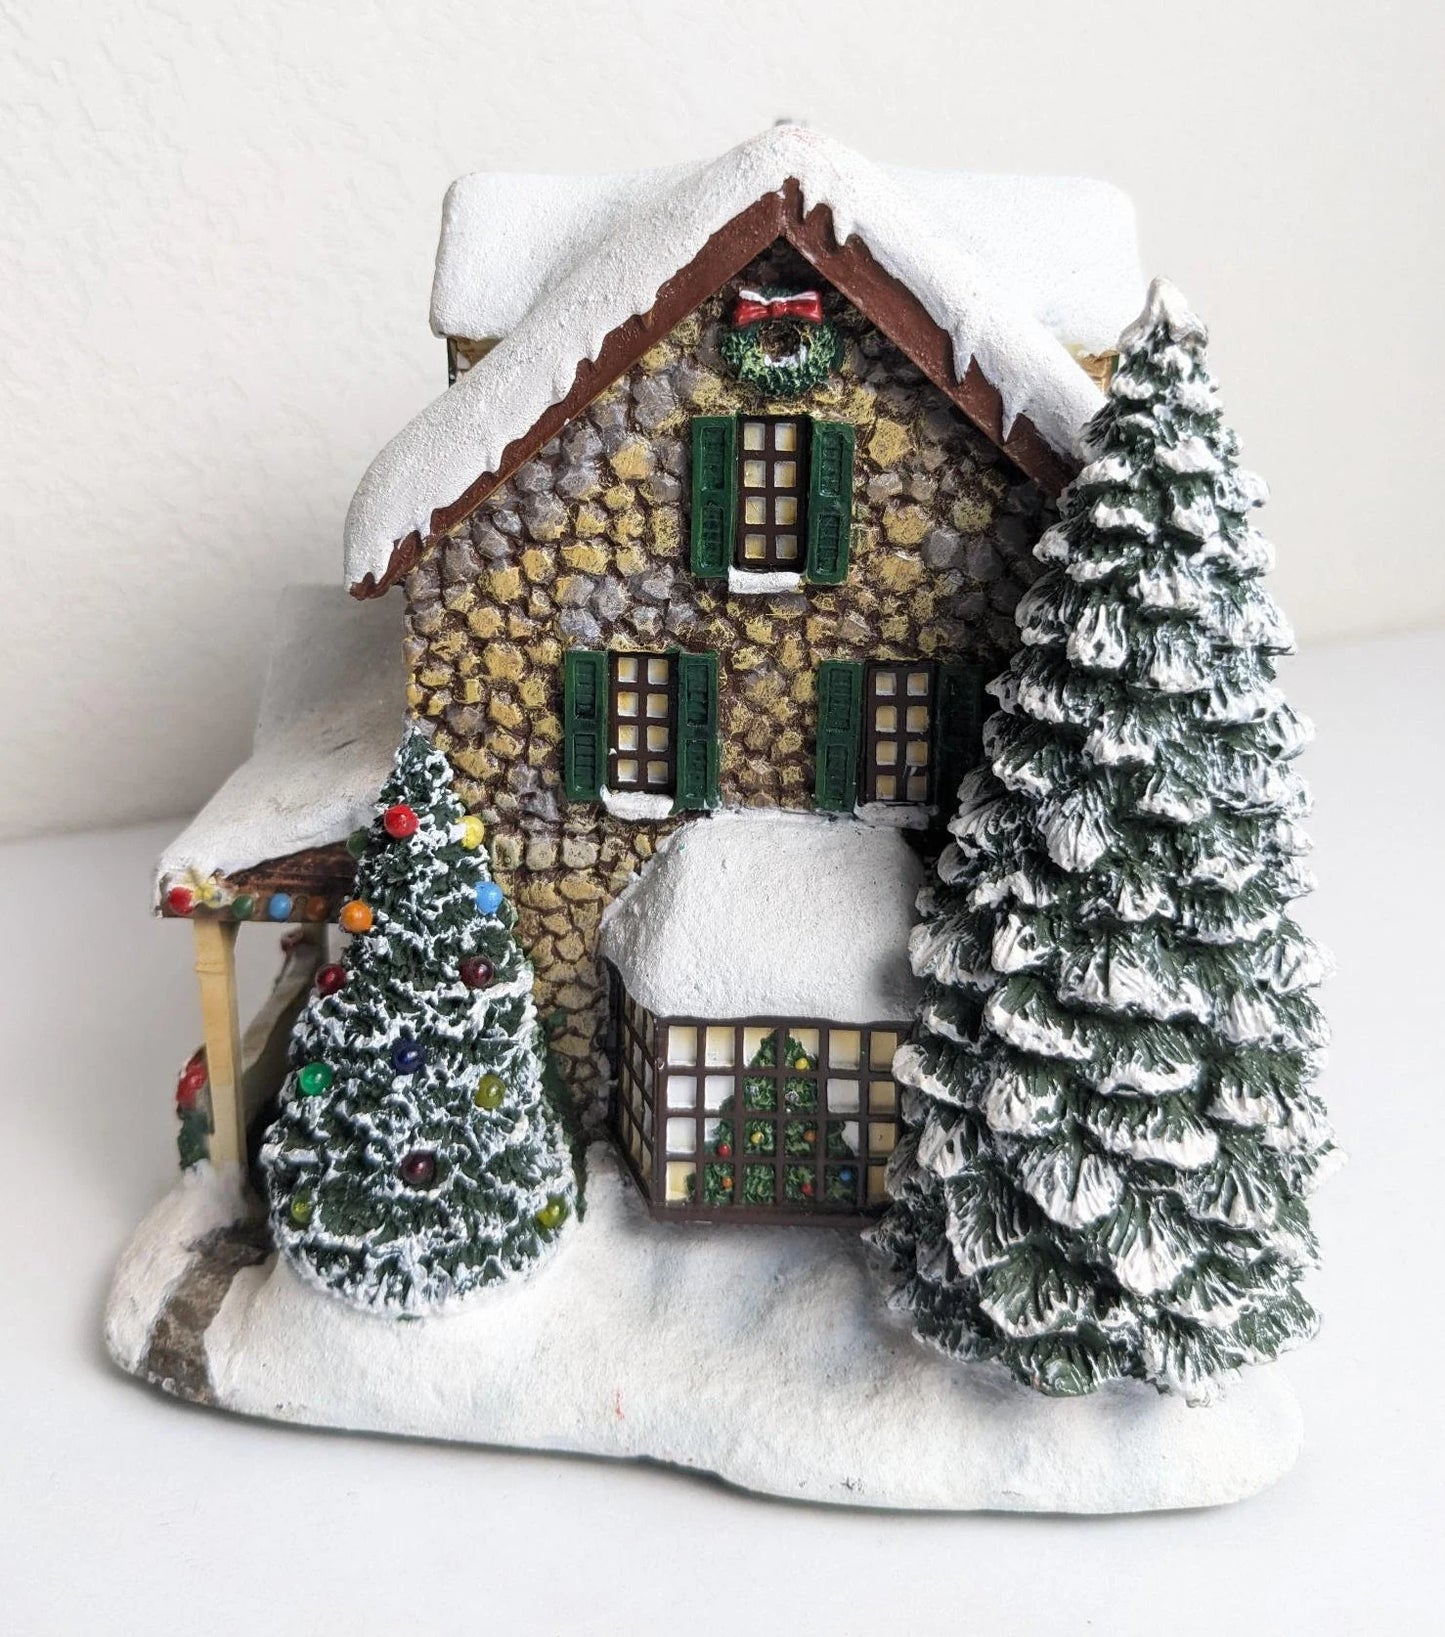 Thomas Kinkade "From the Heart Gifts" Christmas Village Shop